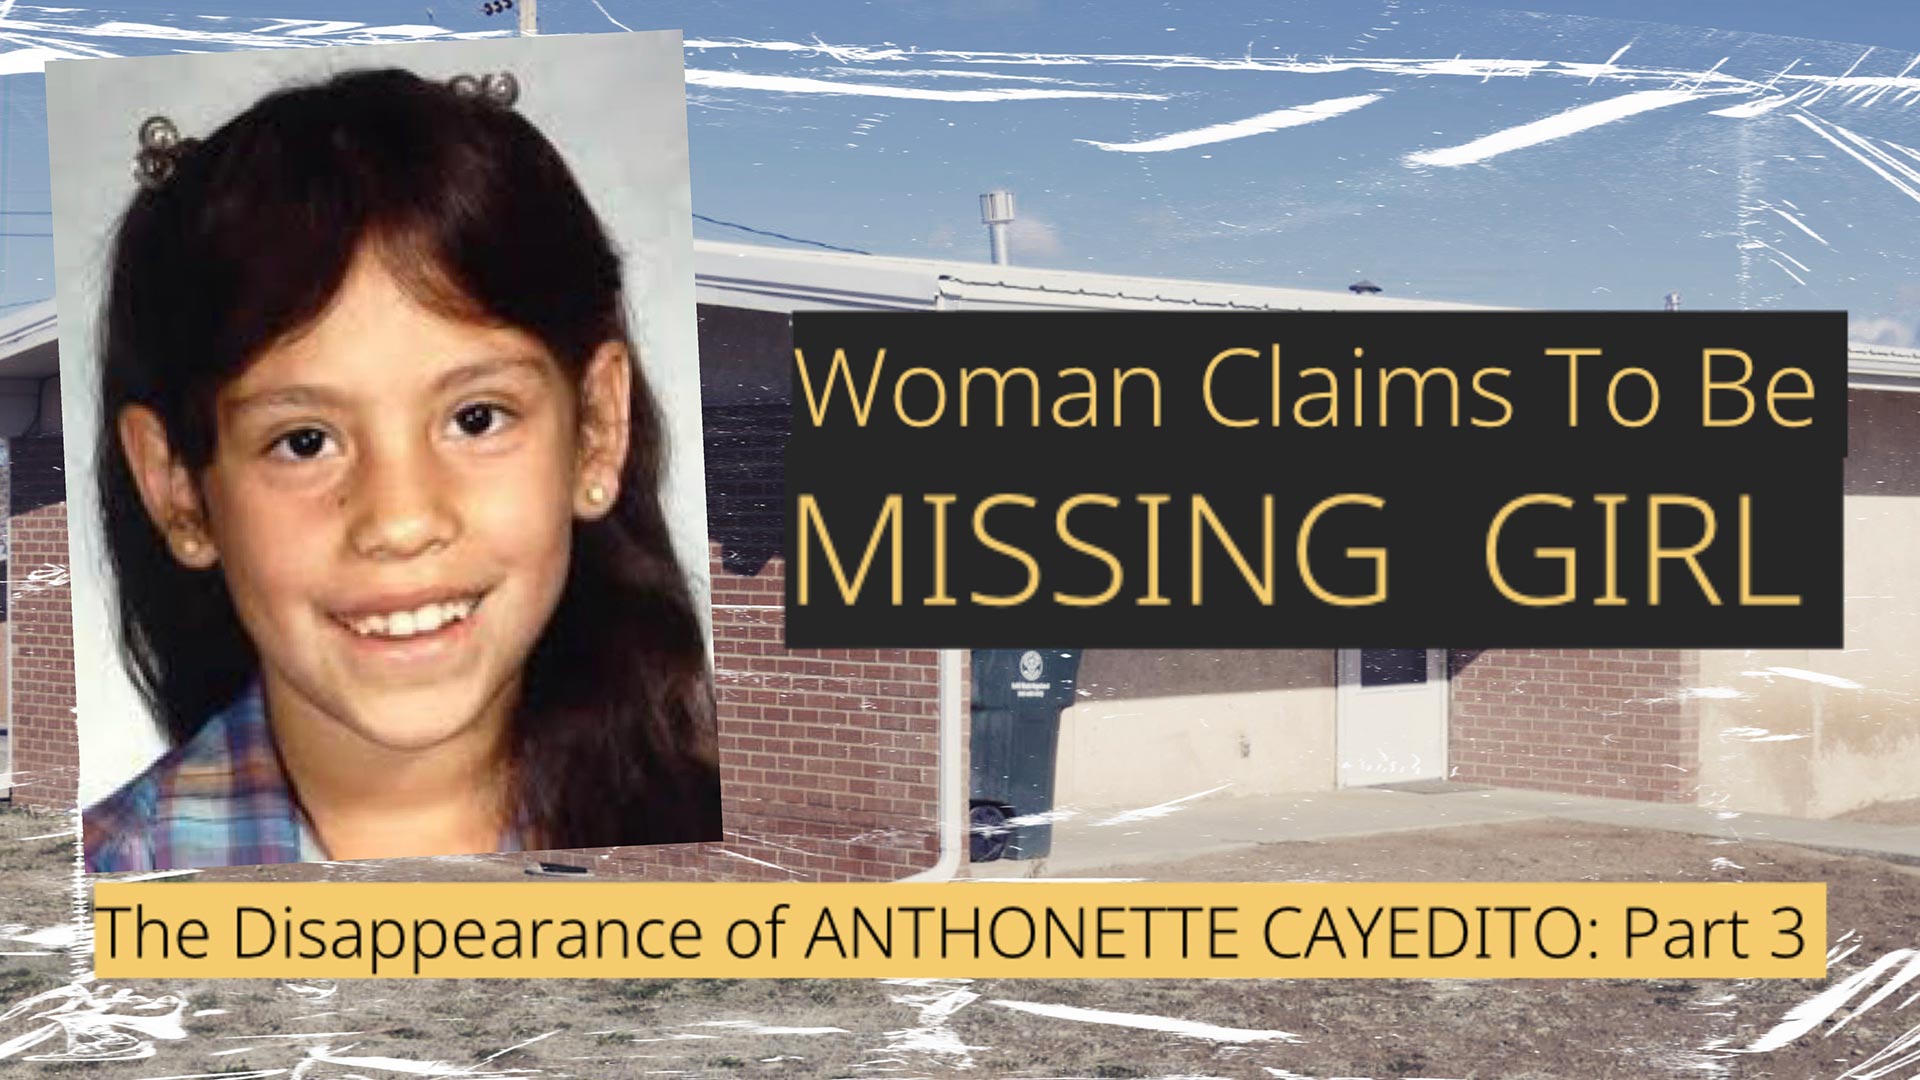 Anthonette Cayedito Case | Woman claims to be missing girl